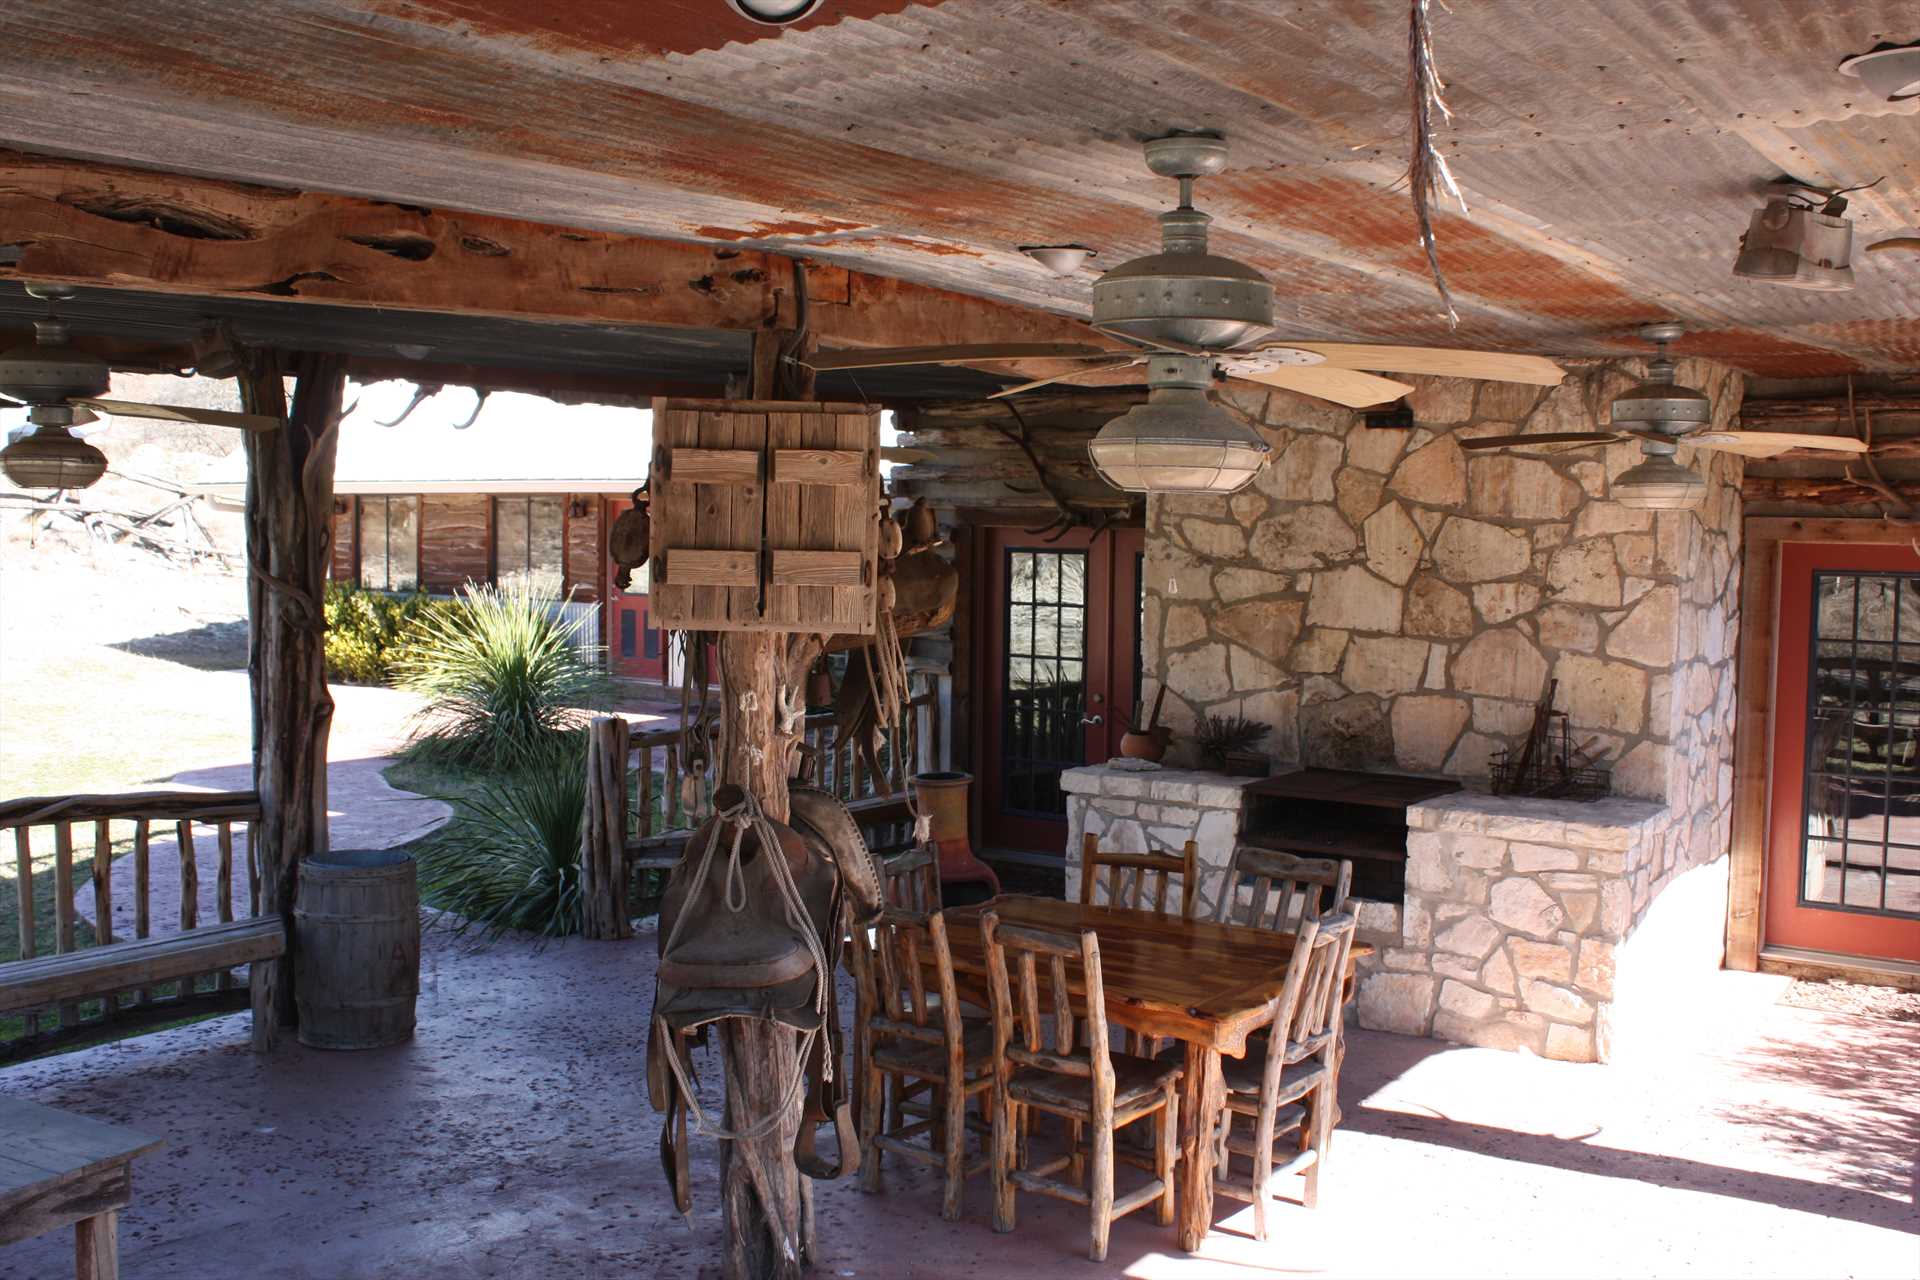                                                 If there isn't a Hill Country breeze blowing, you can stir up your own with the ceiling fans on the lower patio.